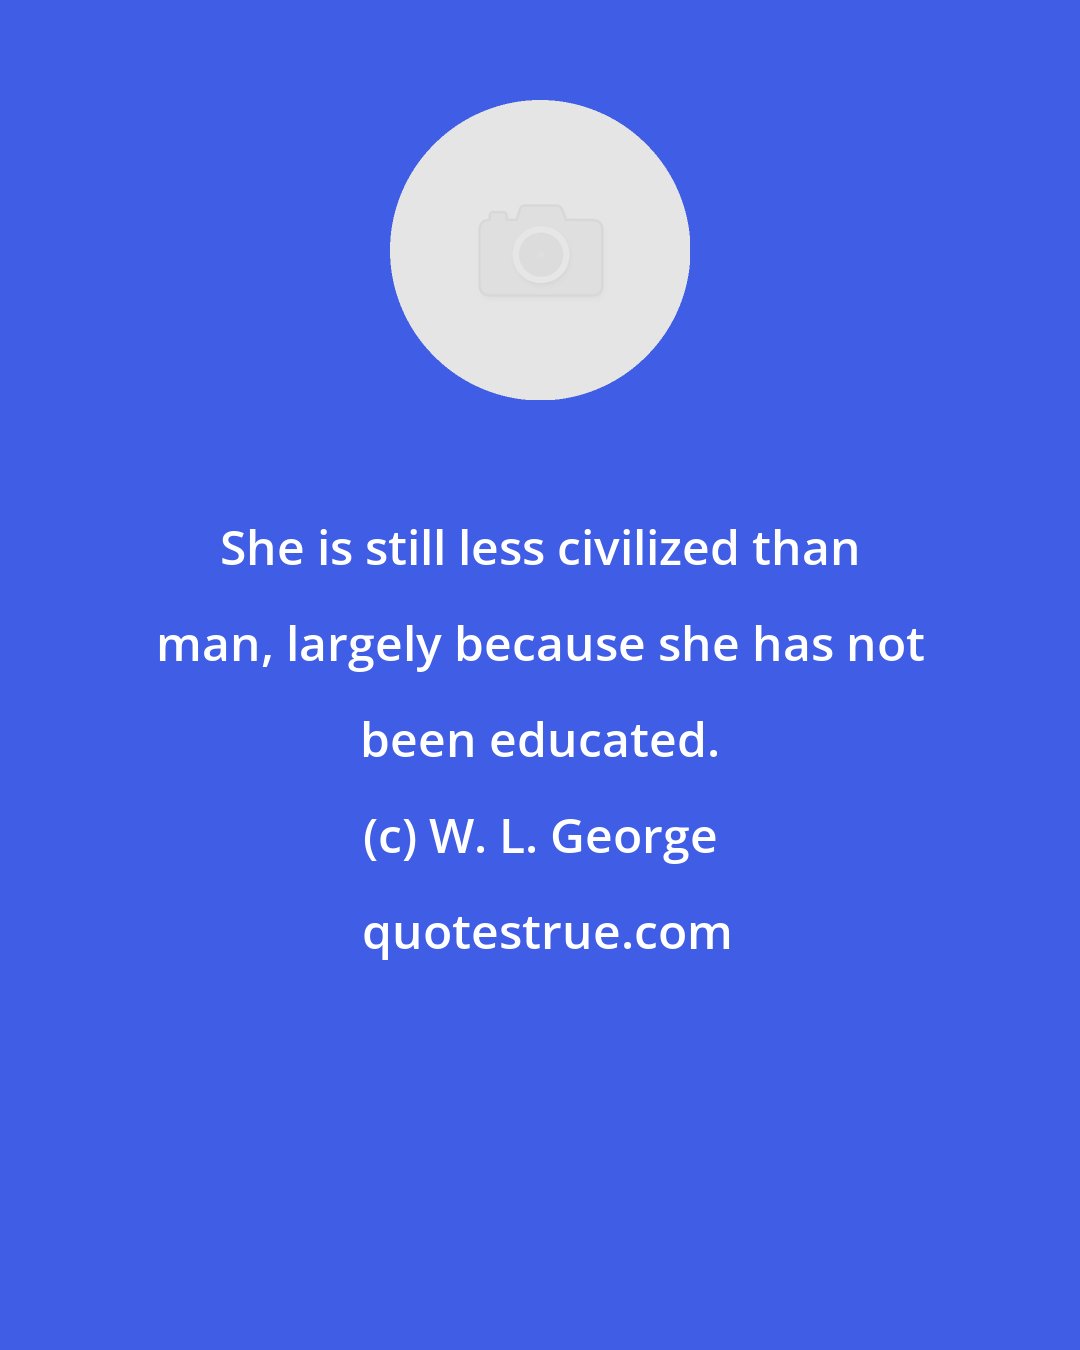 W. L. George: She is still less civilized than man, largely because she has not been educated.